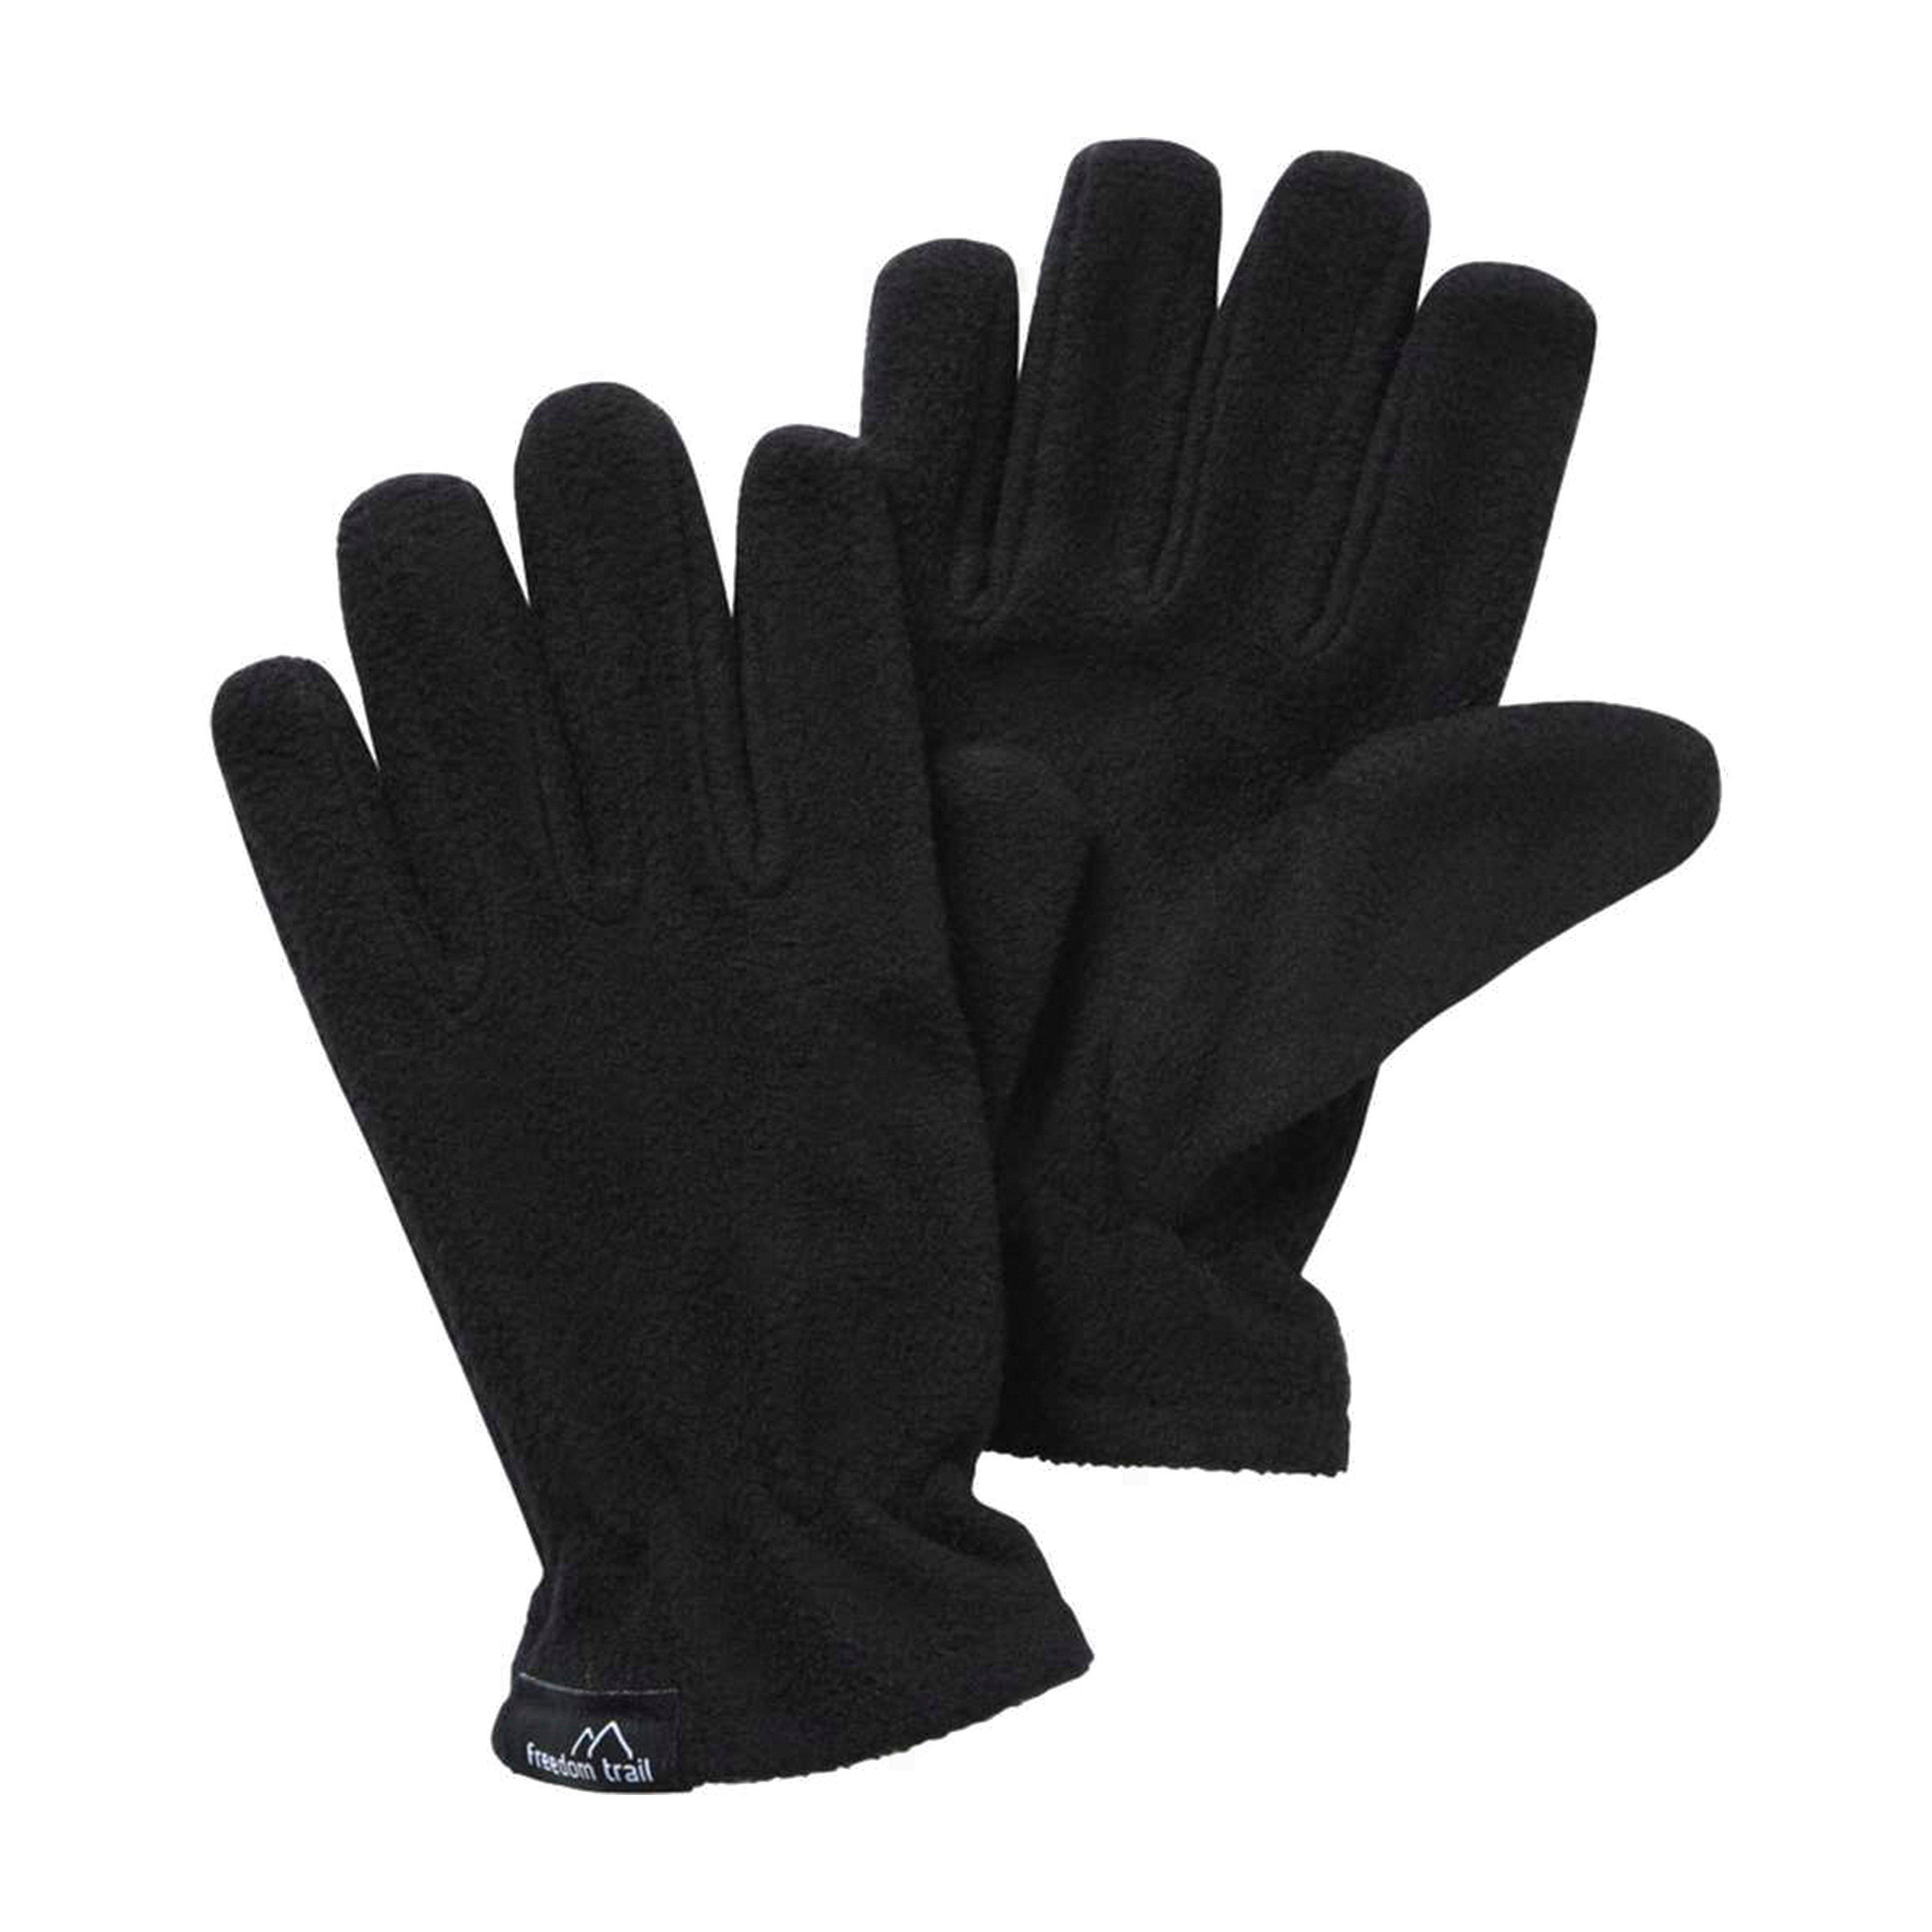 FreedomTrail Kids' Essential Fleece Gloves Review